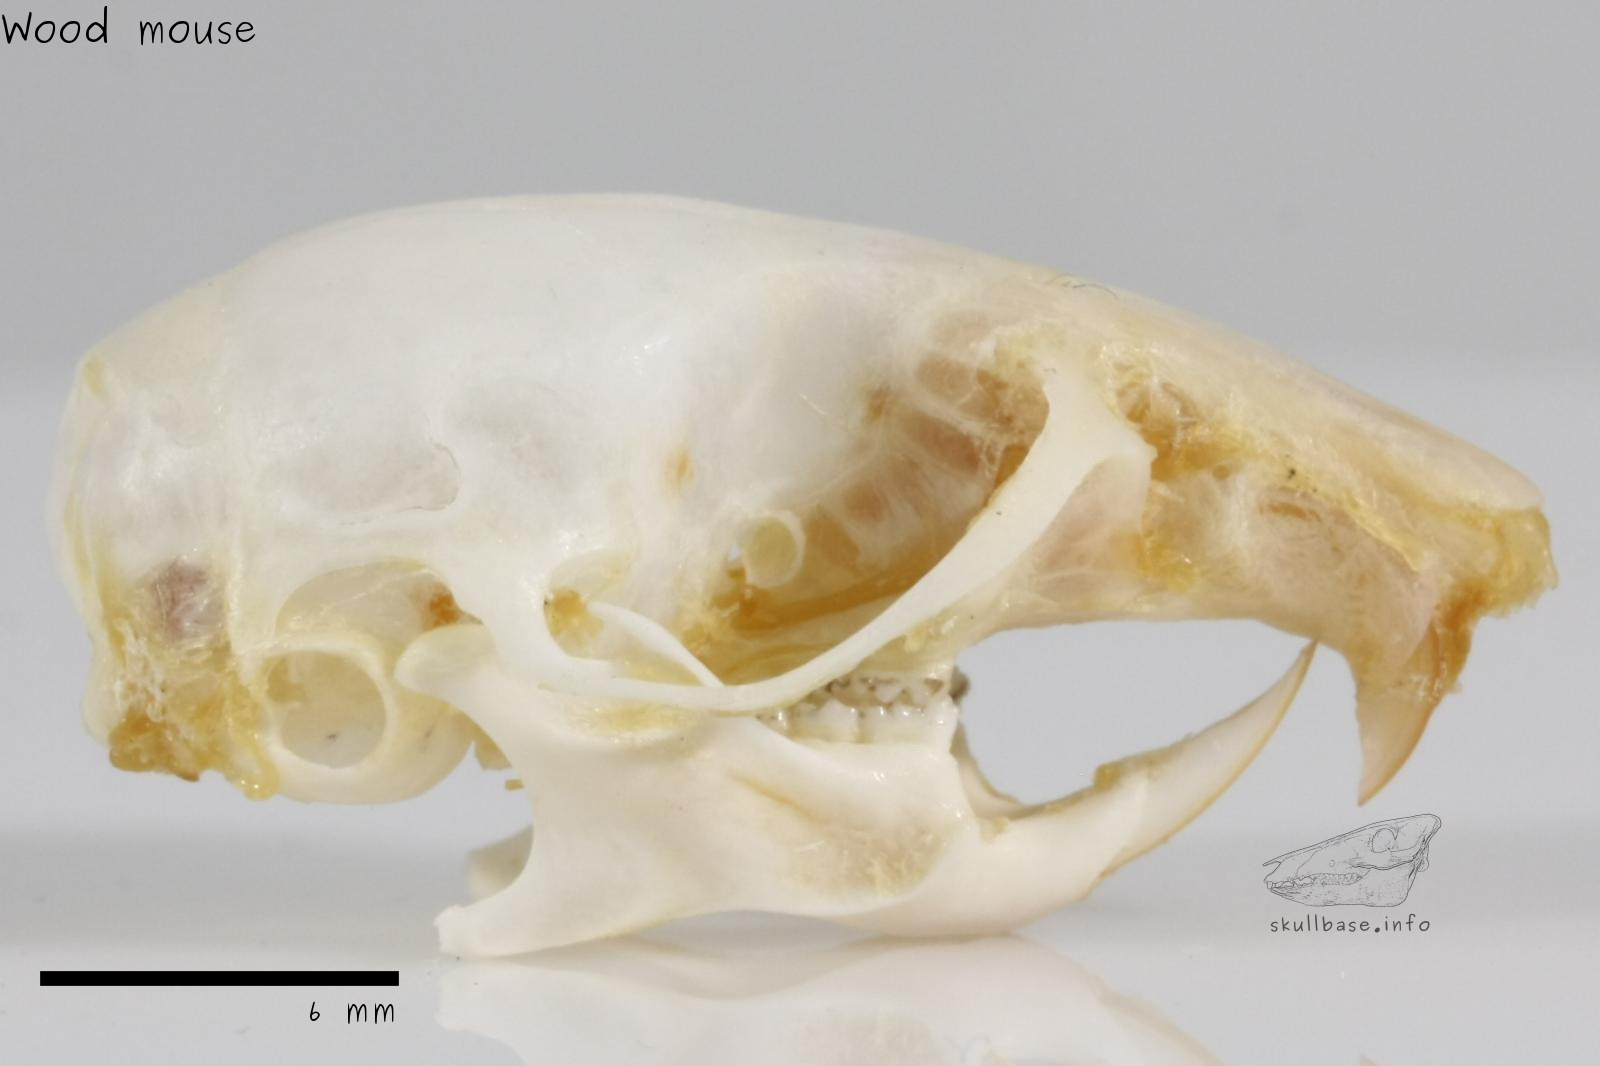 Wood mouse (Apodemus sylvaticus) skull lateral view